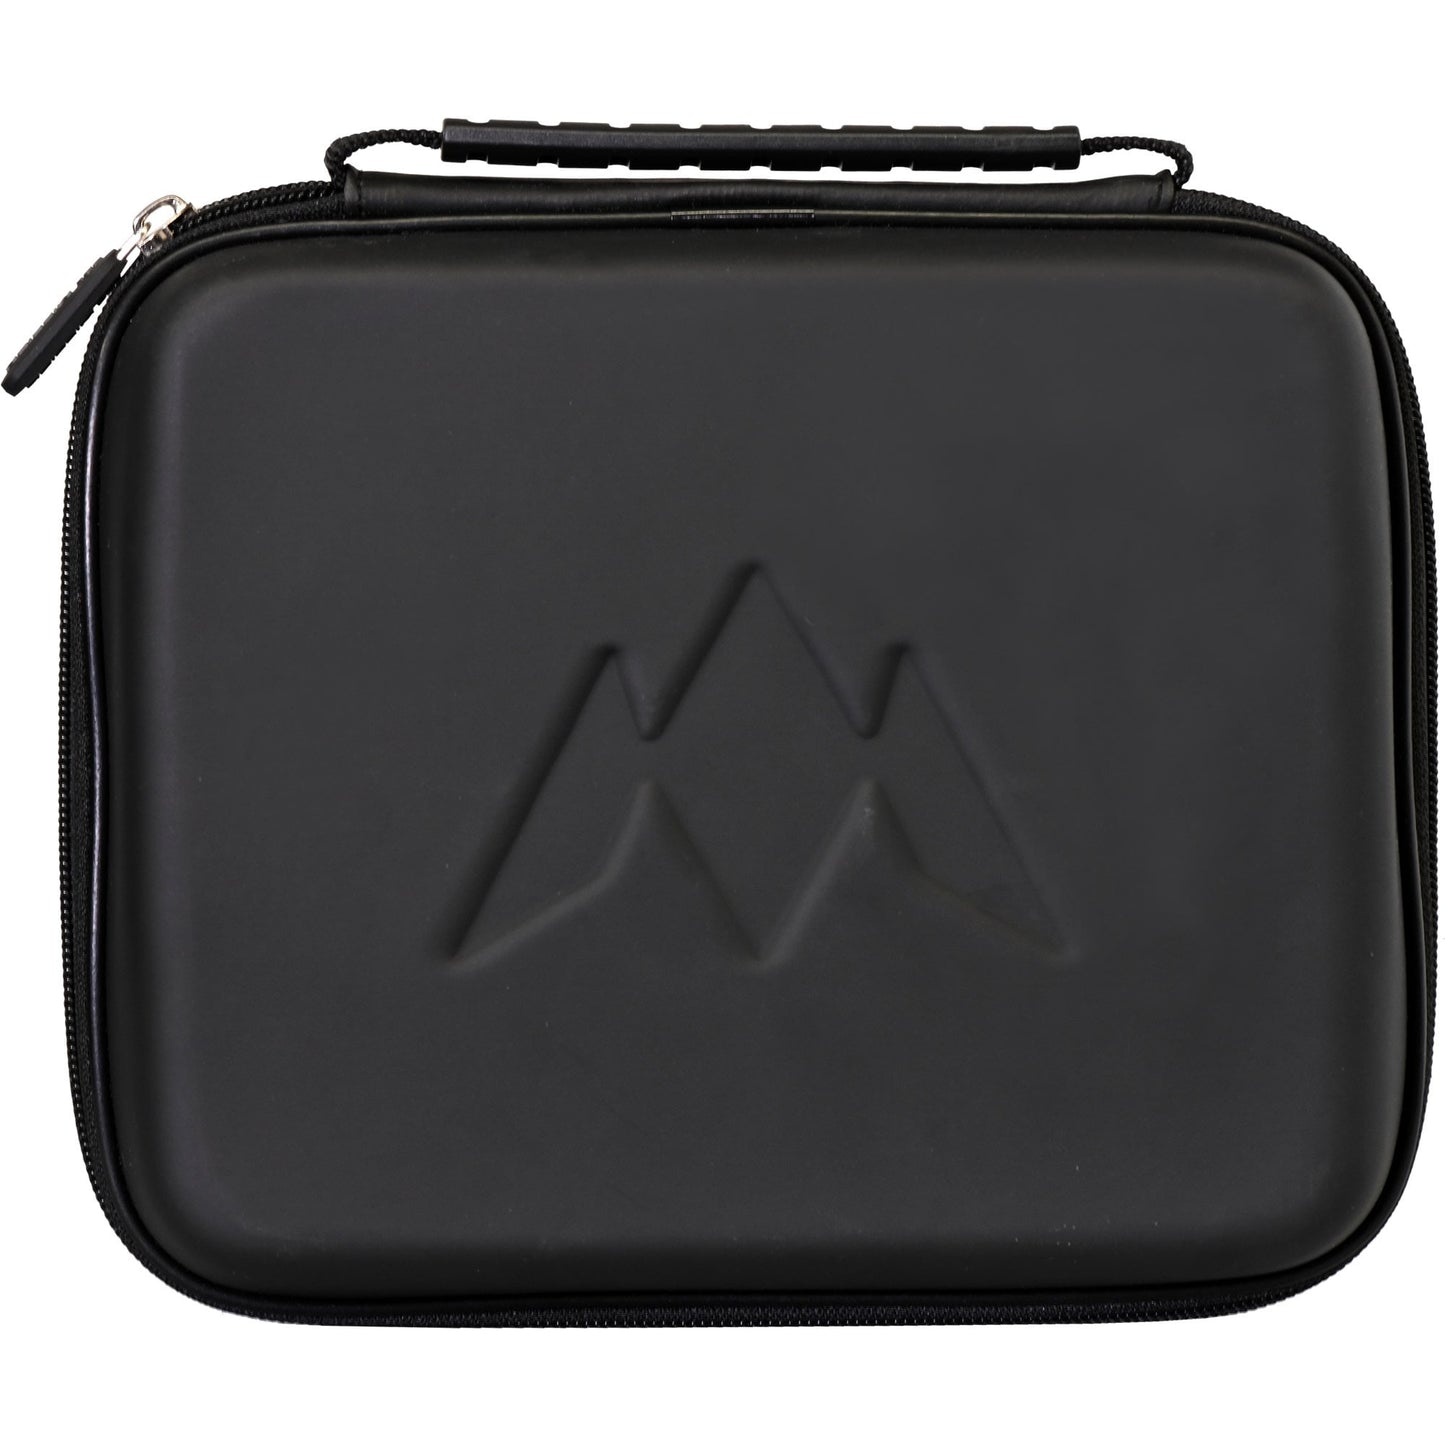 Mission Freedom Luxor Darts Case 3 - Strong Protection